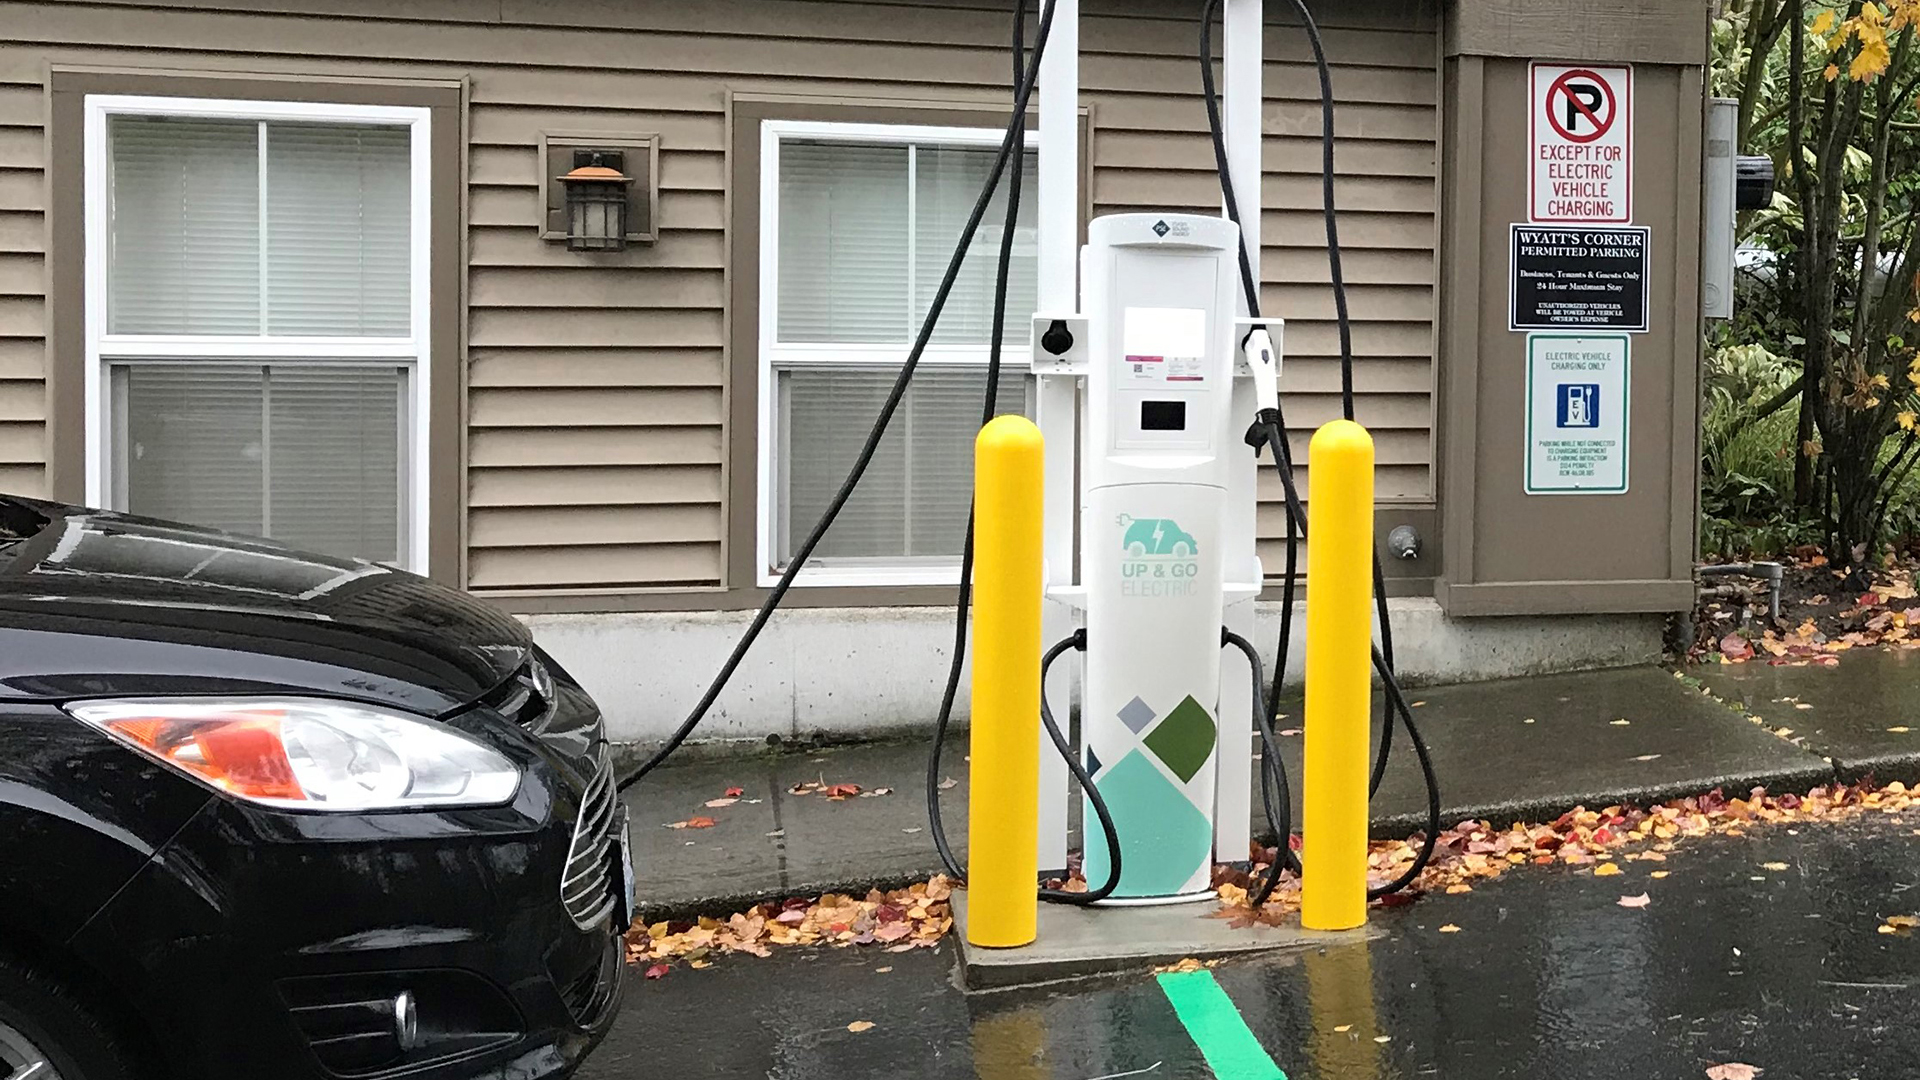 Senga LLC on Bainbridge Island was one of 40 businesses in PSE’s service area to receive electric vehicle charging through our Workplace Charging pilot.